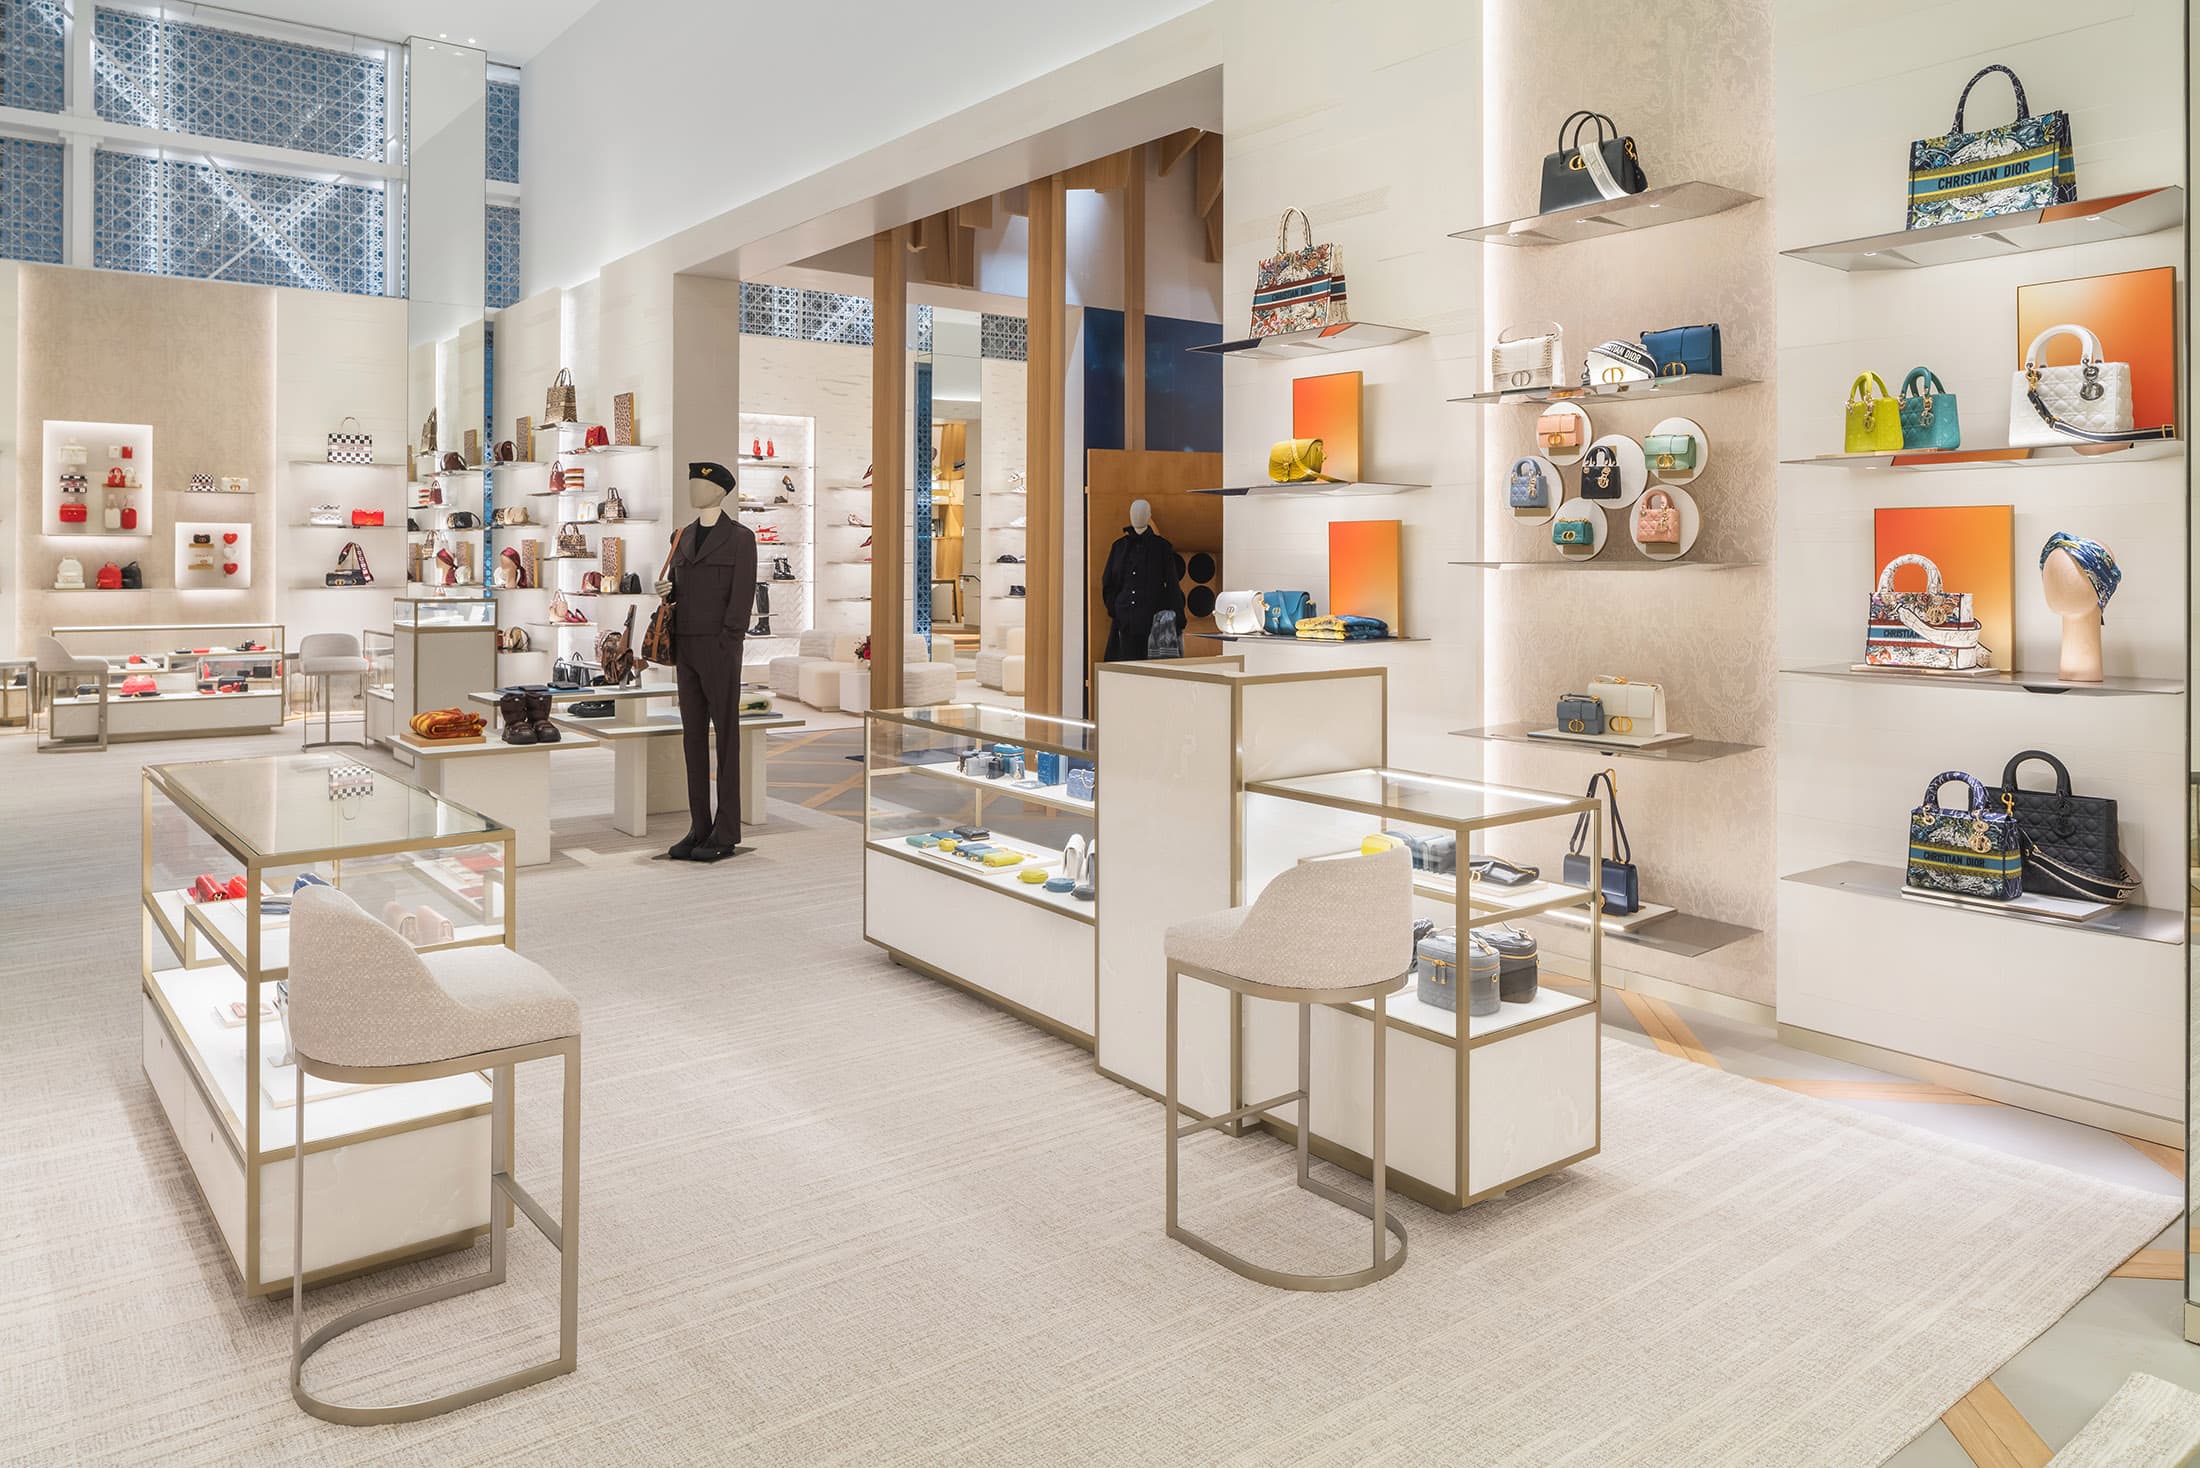 Dior opens temporary Fifth Avenue store